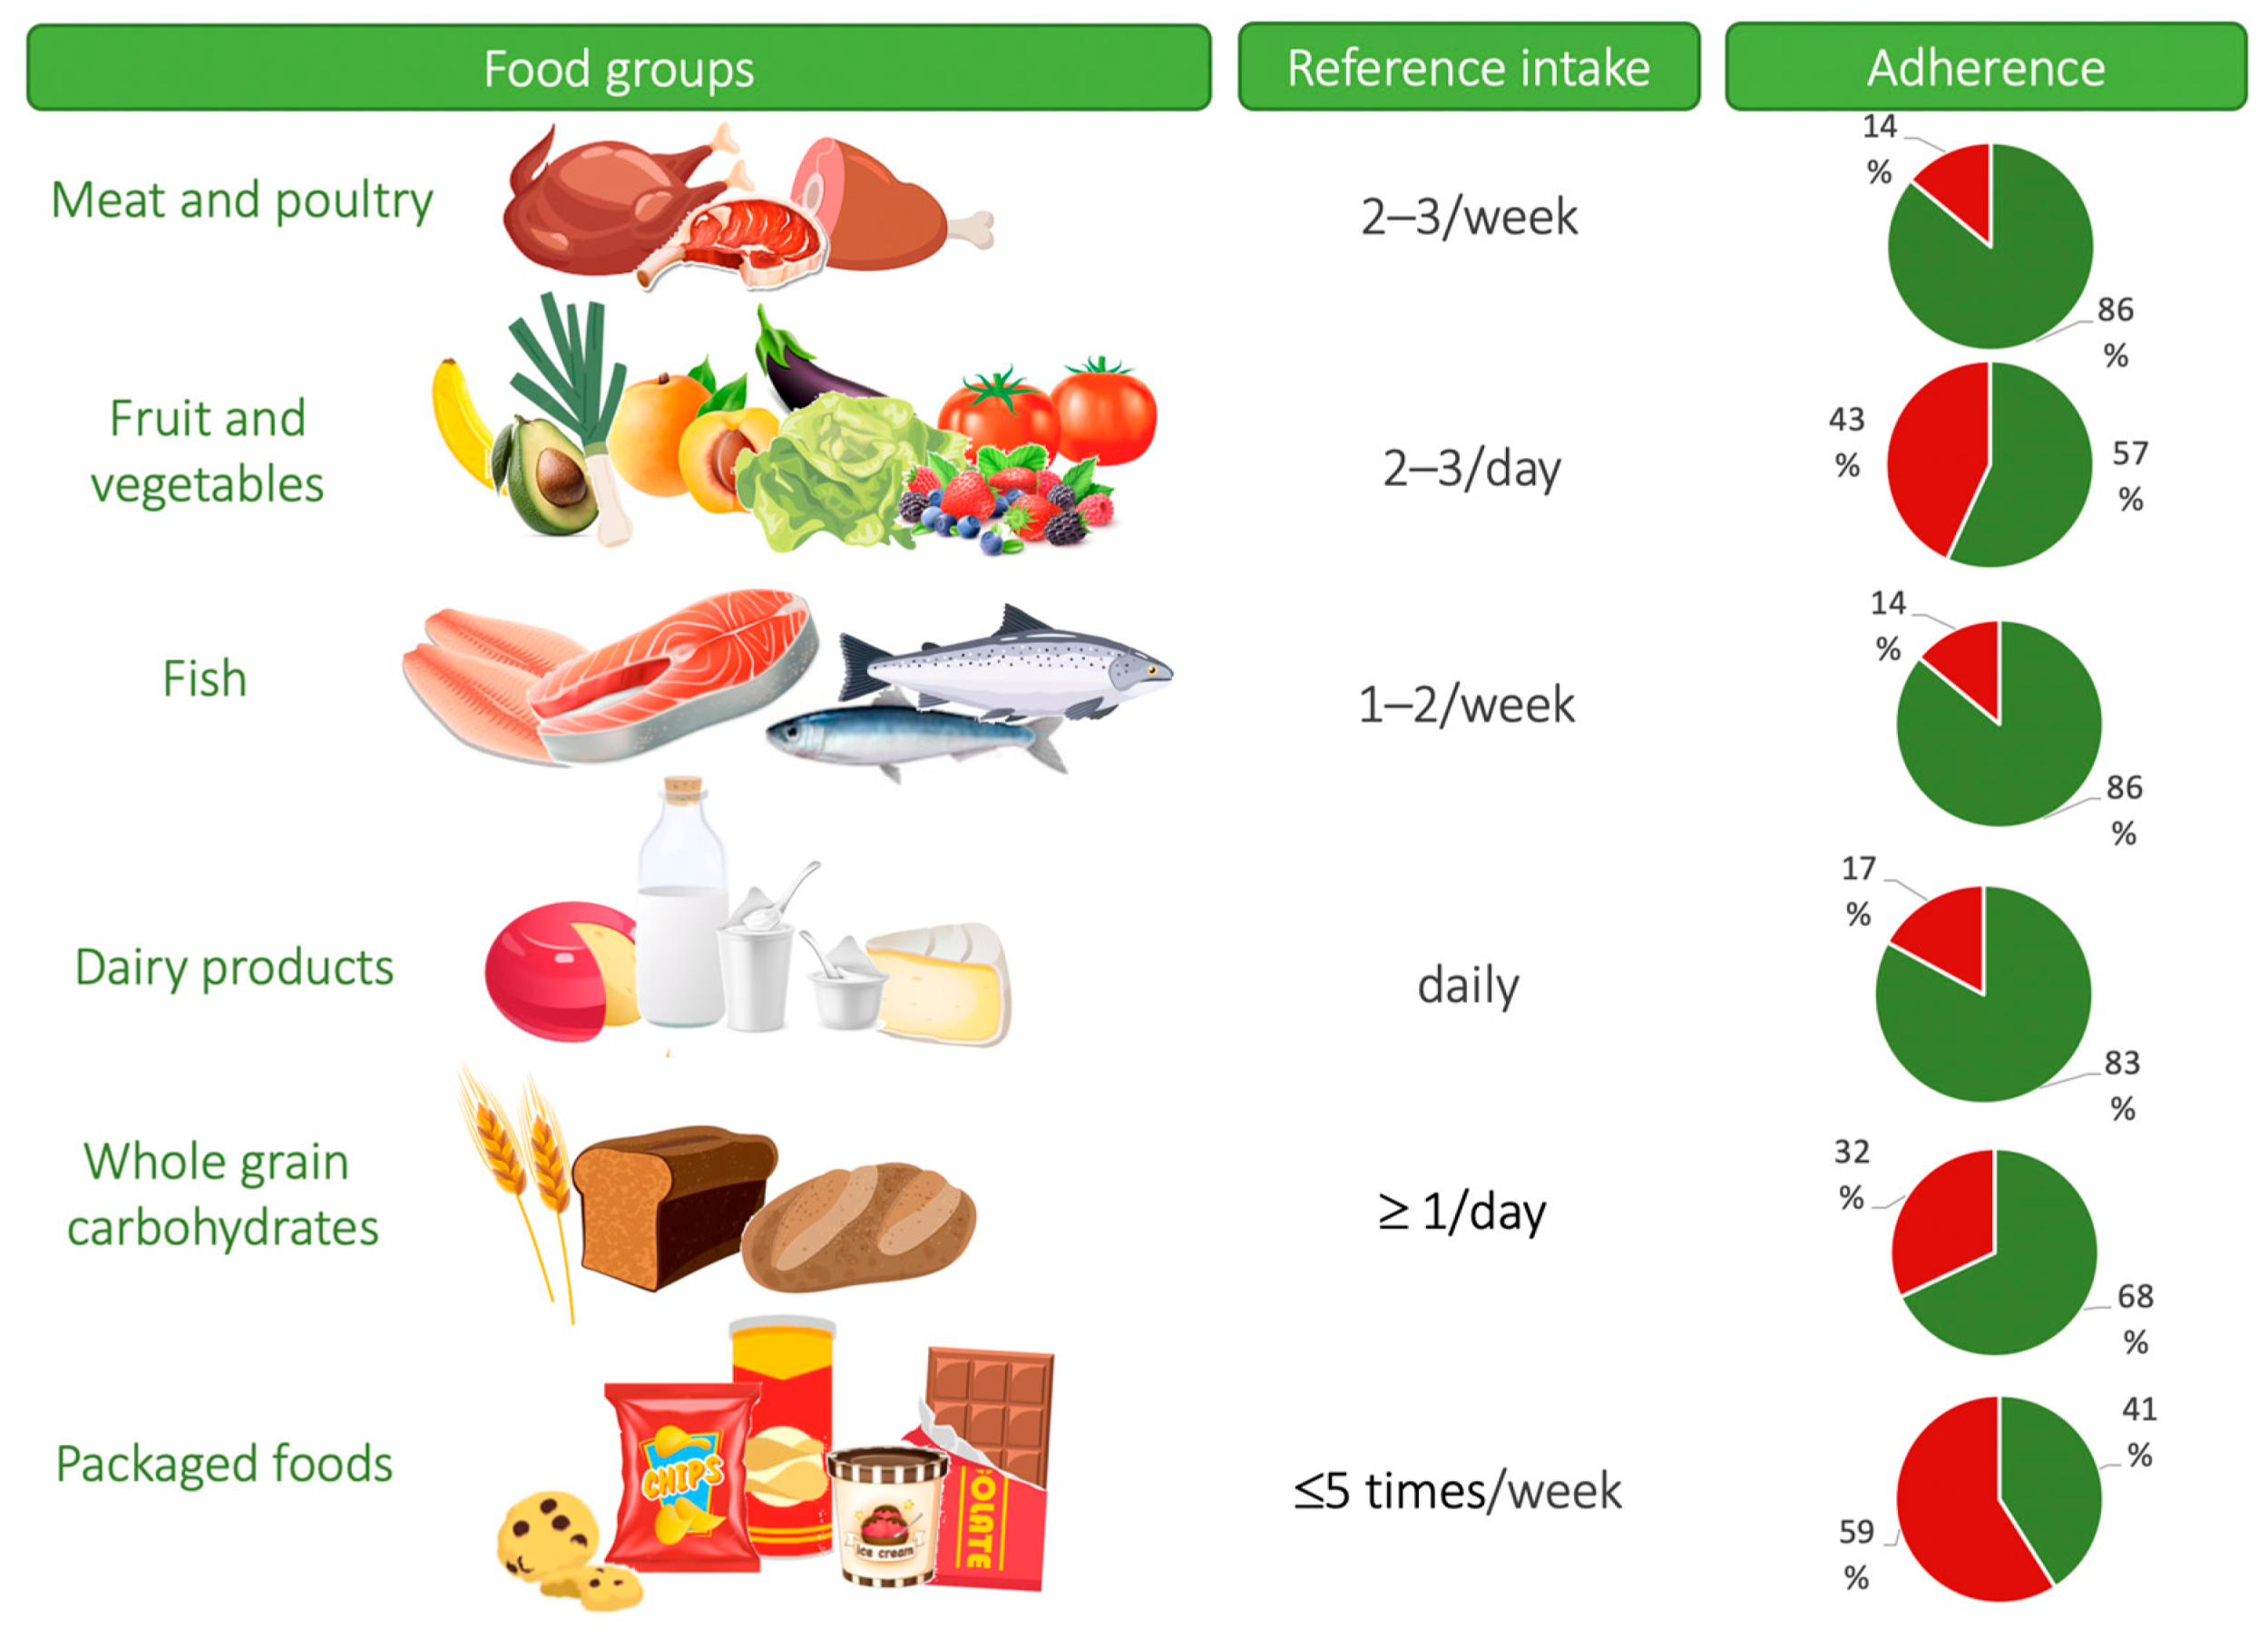 Third Trimester Pregnancy Update - Nourished By Nutrition